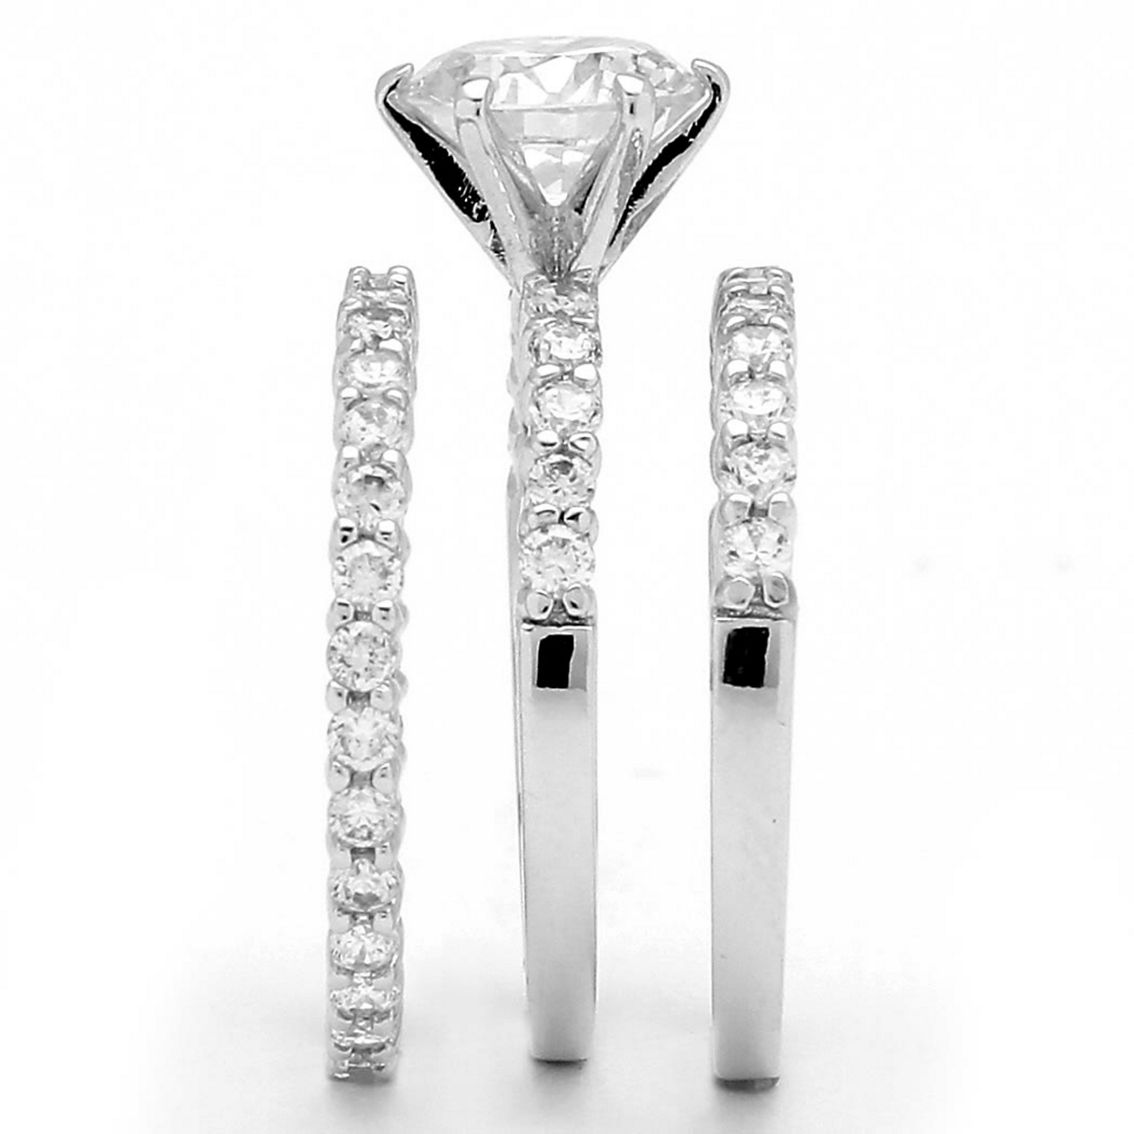 PalmBeach 3 Piece 3.75 TCW CZ Bridal Ring Set in Platinum-plated Sterling Silver - Image 2 of 5